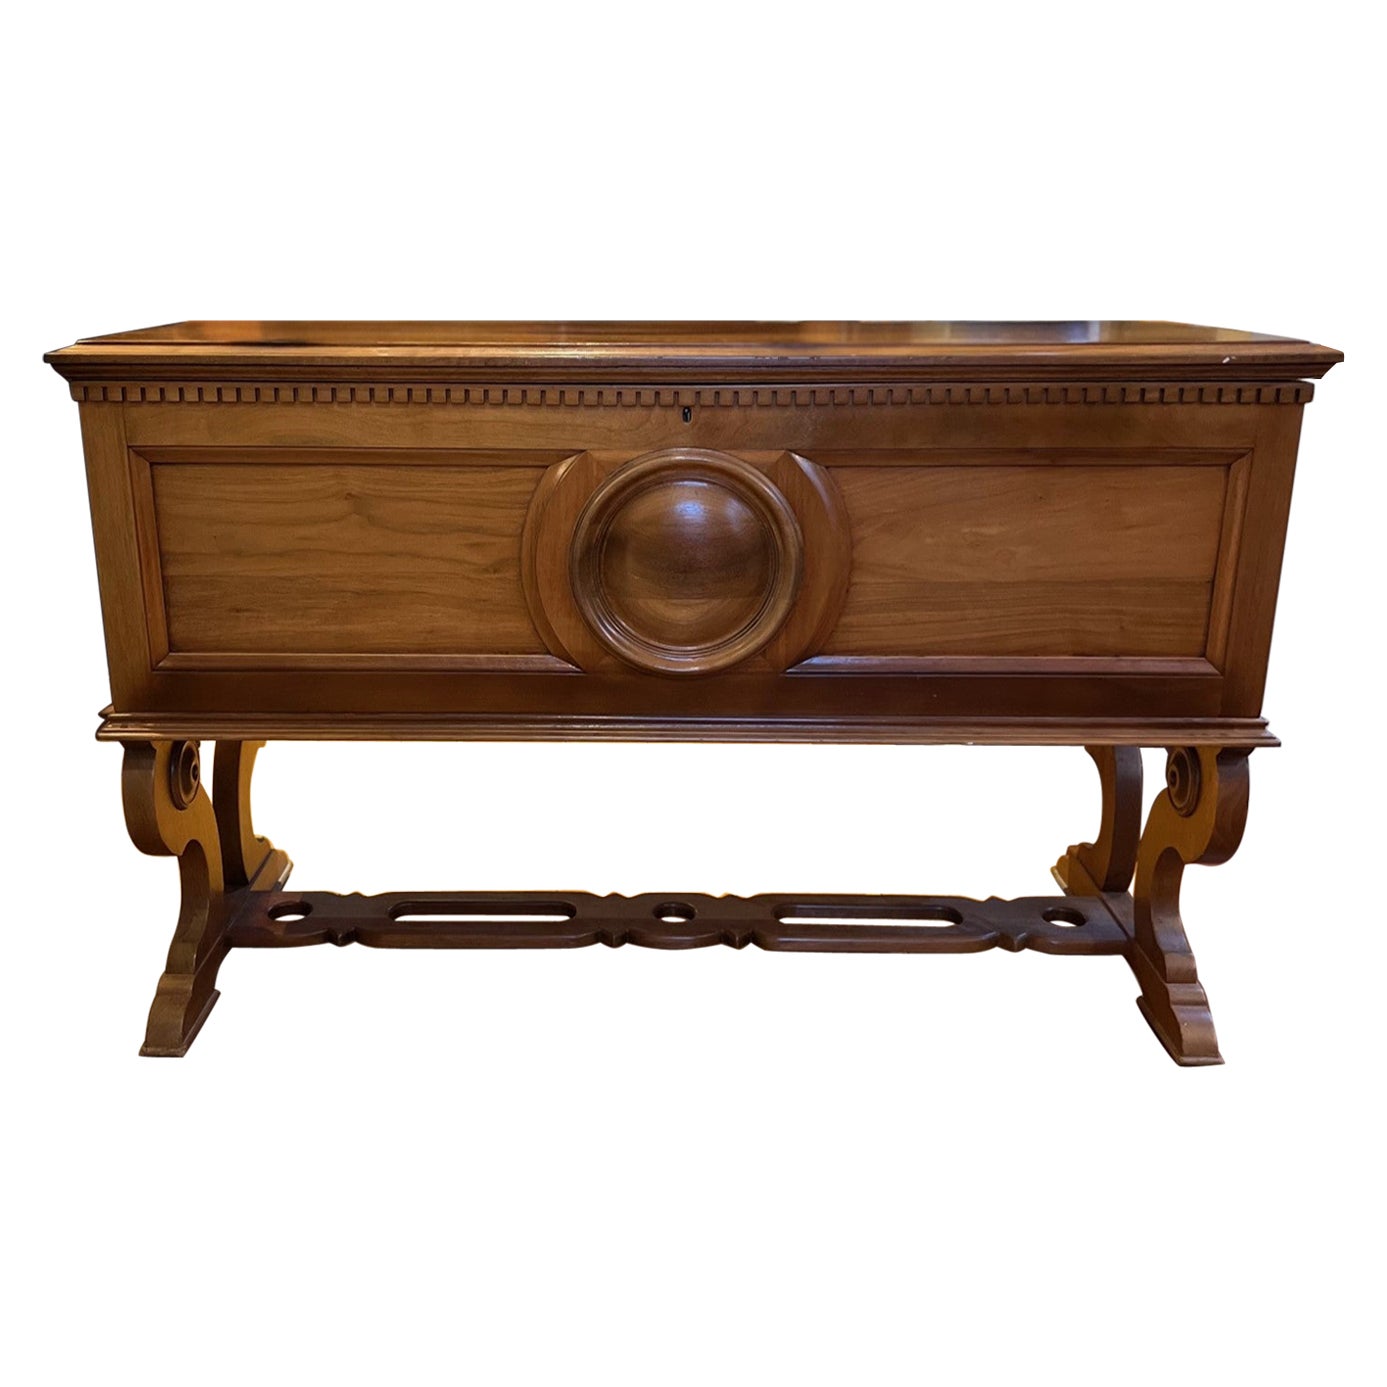 Vintage Camphor Wood Coffer/Chest With Interior Lift Out Storage Tray For Sale